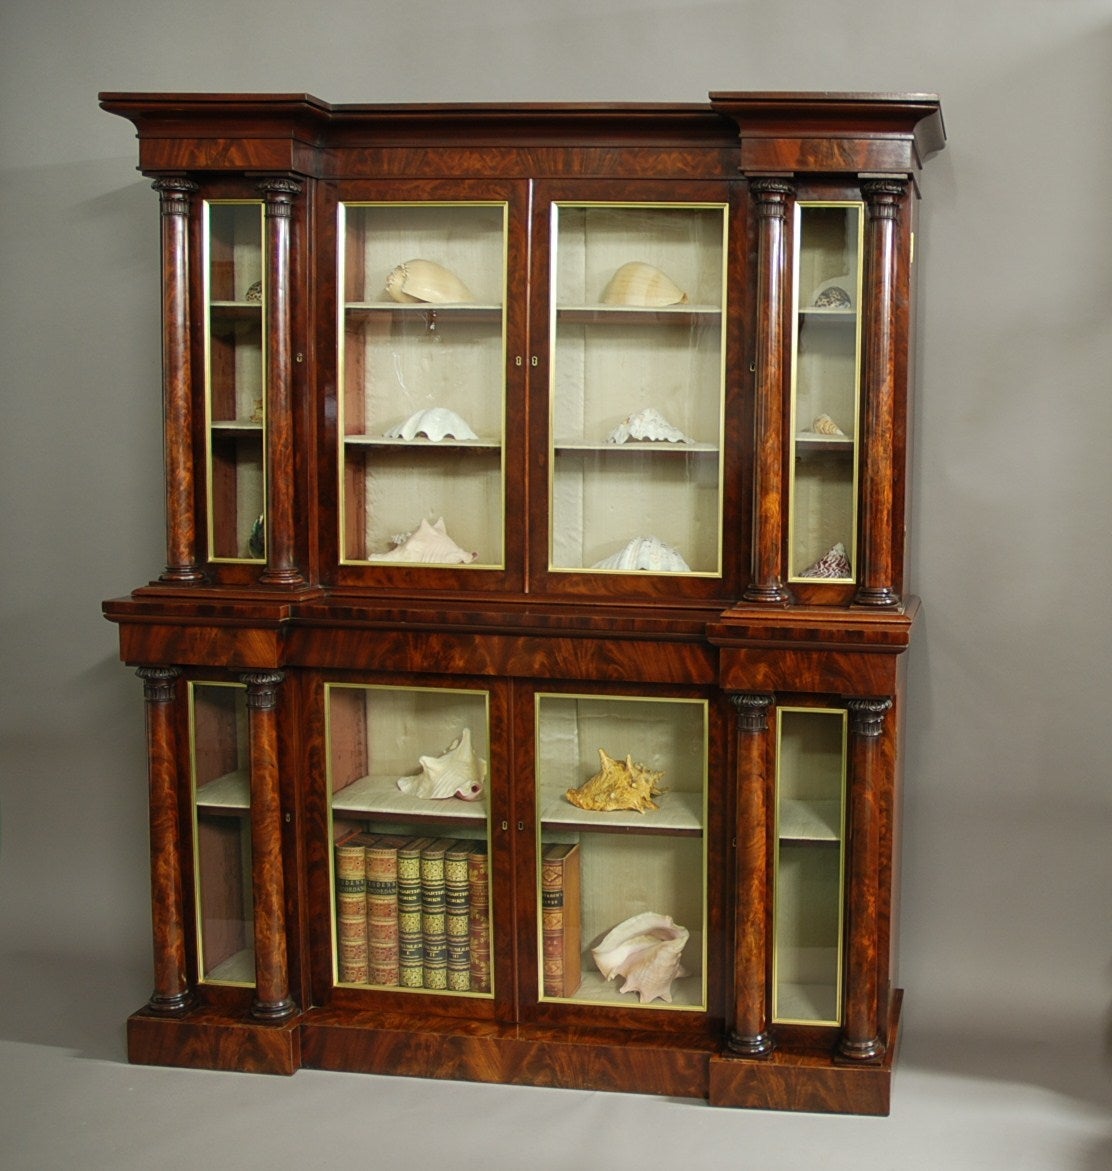 English William IV Mahogany Inverted Breakfront Bookcase of Small Proportions